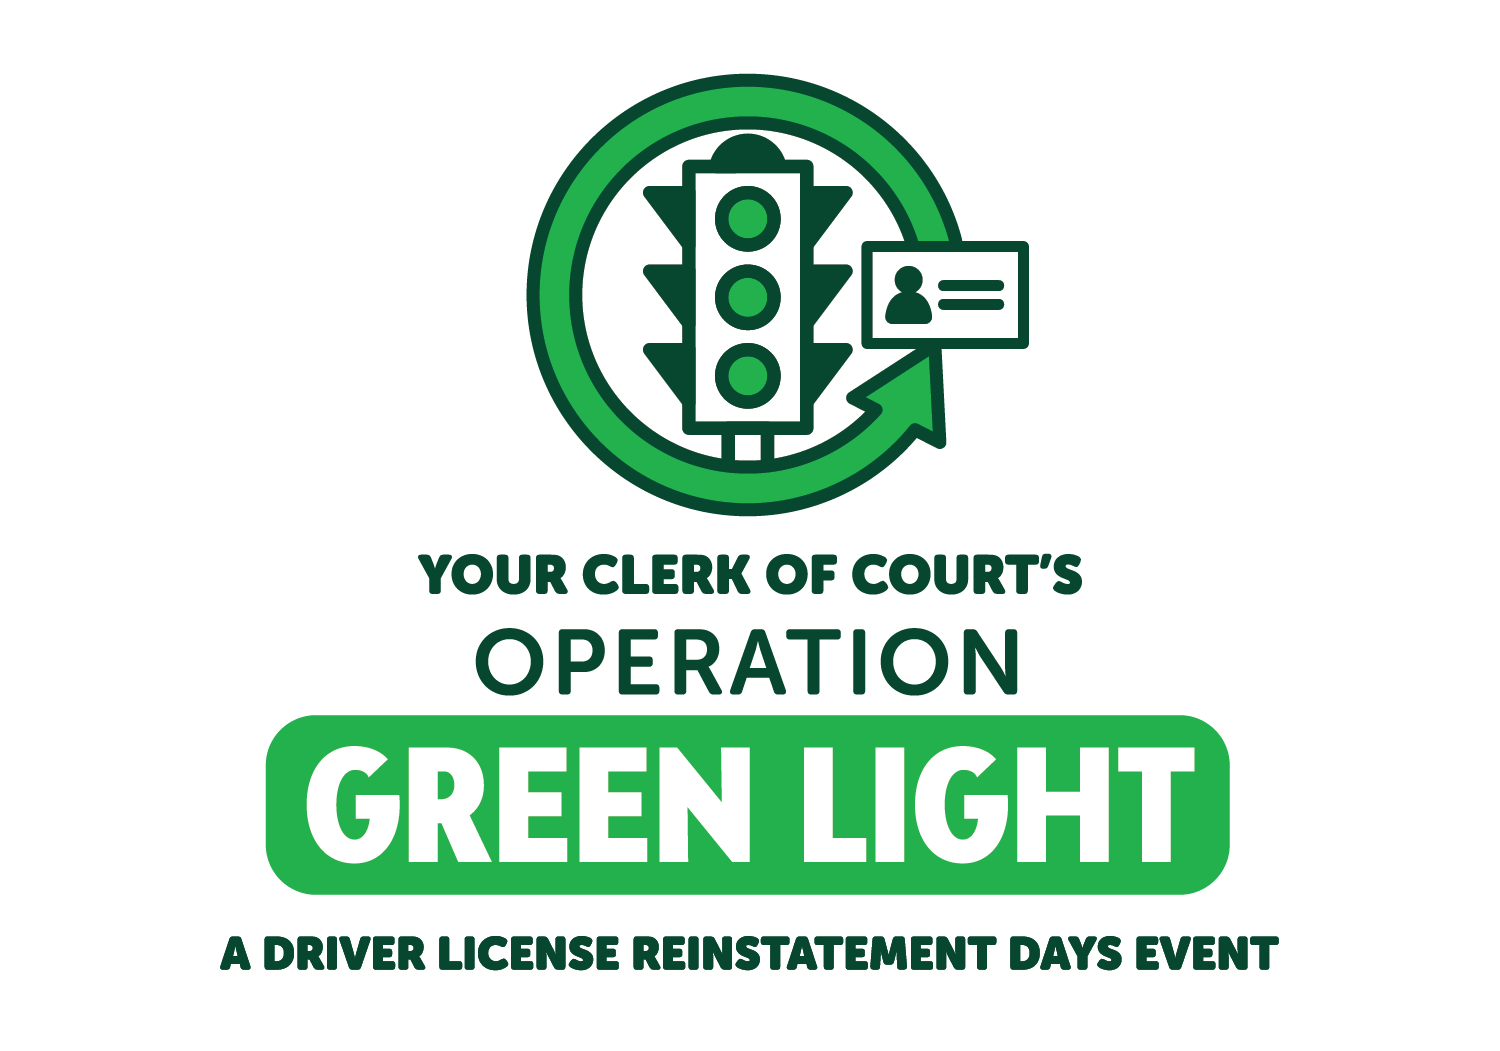 Suspended License? Save Money - Get Back on the Road. This is your chance to save on fees for overdue court obligations and get your license back.
                             Your Clerk of Courts operation green light.  A drivers license reinstatement date event